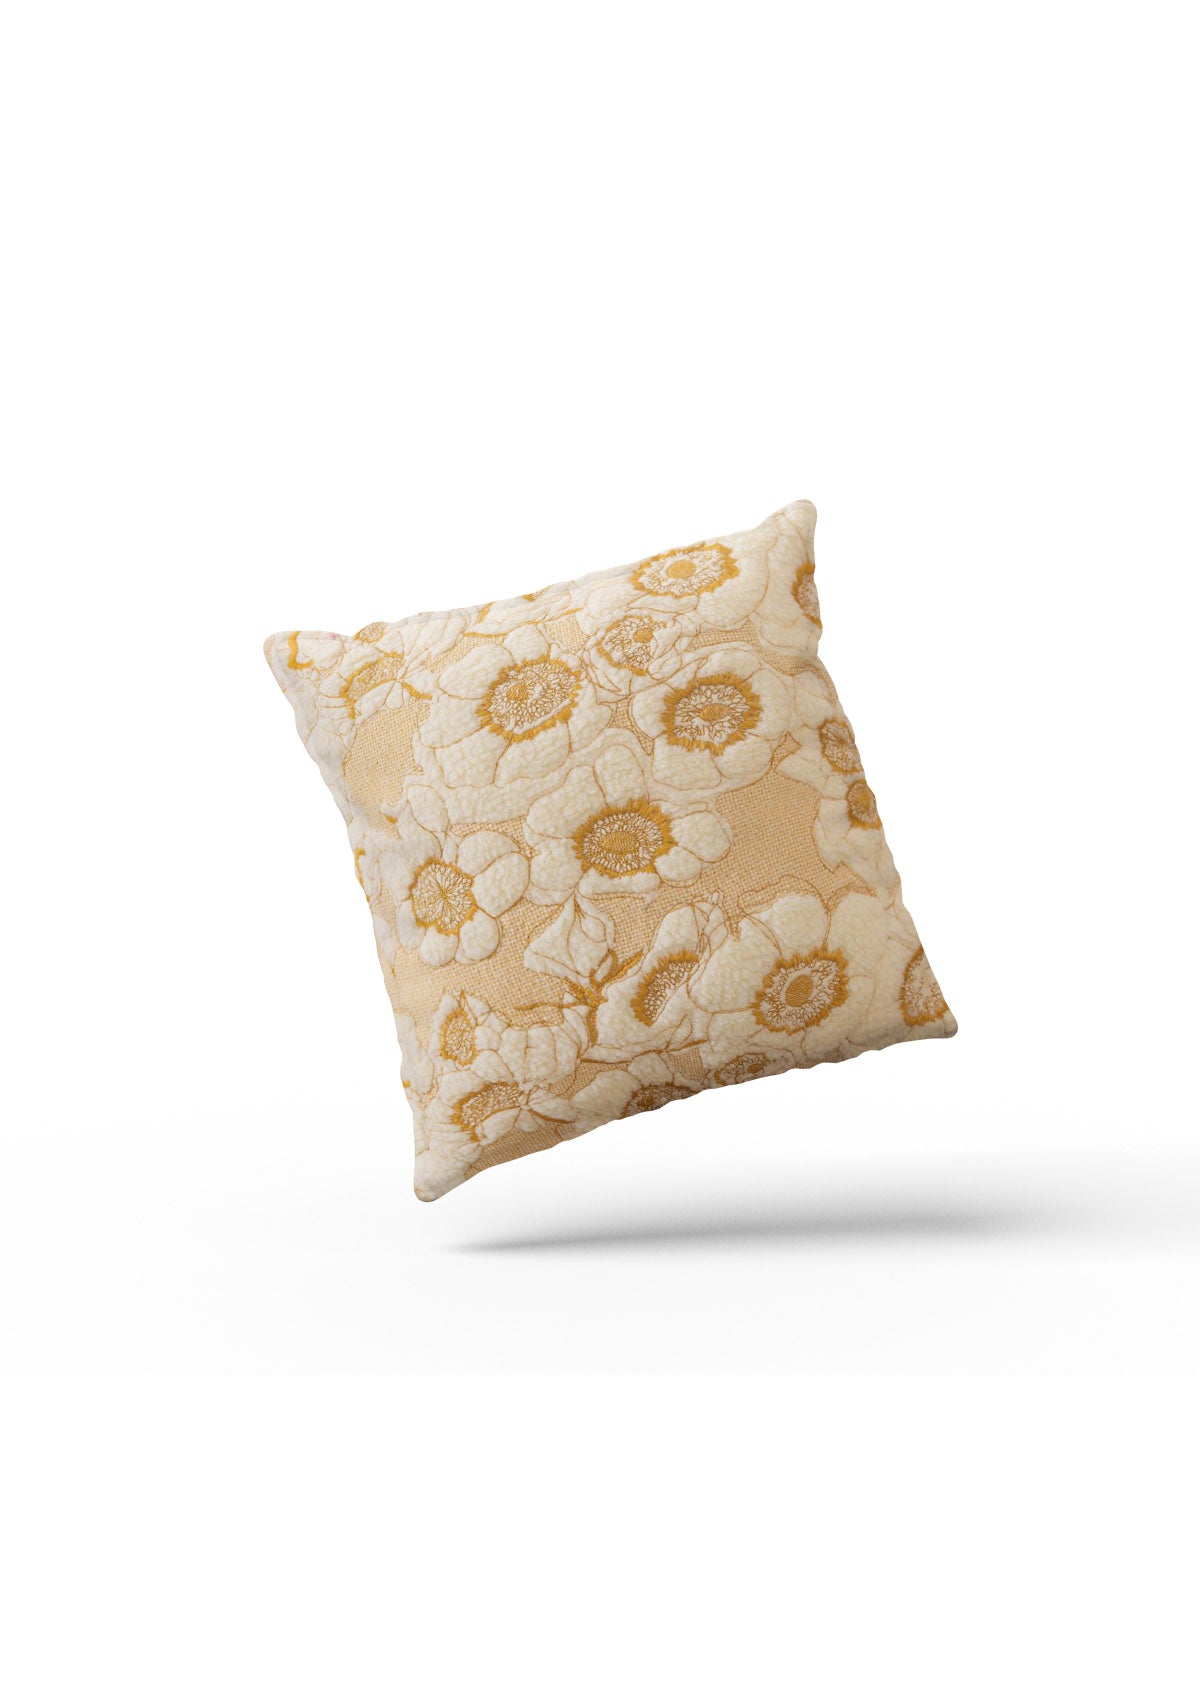 Floral design on a cushion cover, showcasing the beauty and cheerfulness of daisies